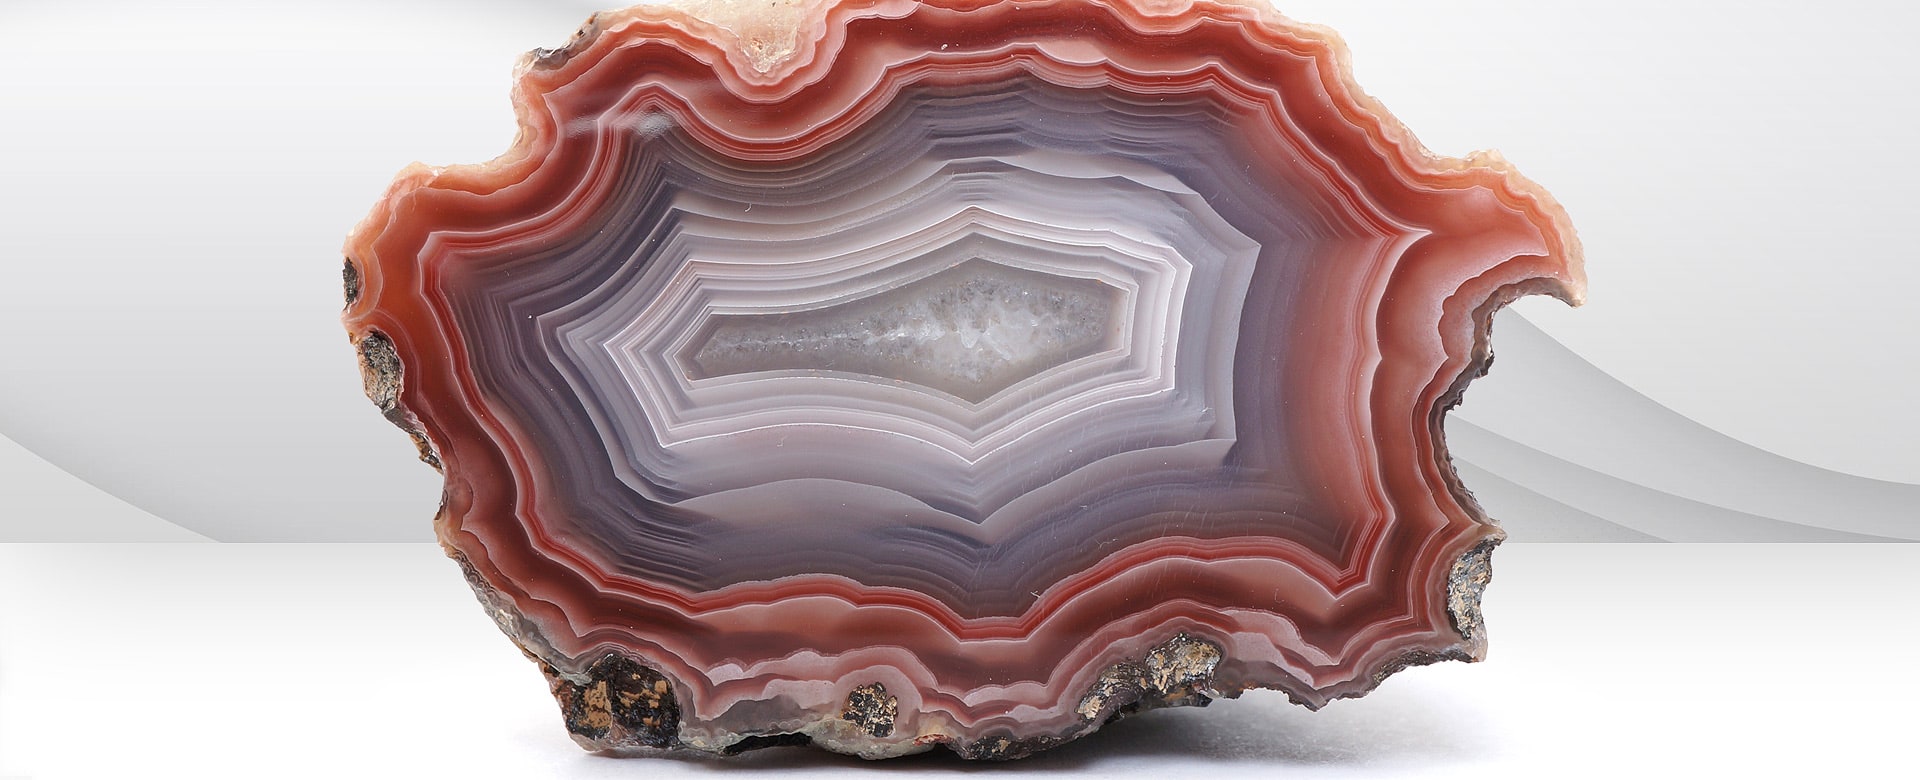 Botswana Agate (Banded Agate) Meaning and Properties 1